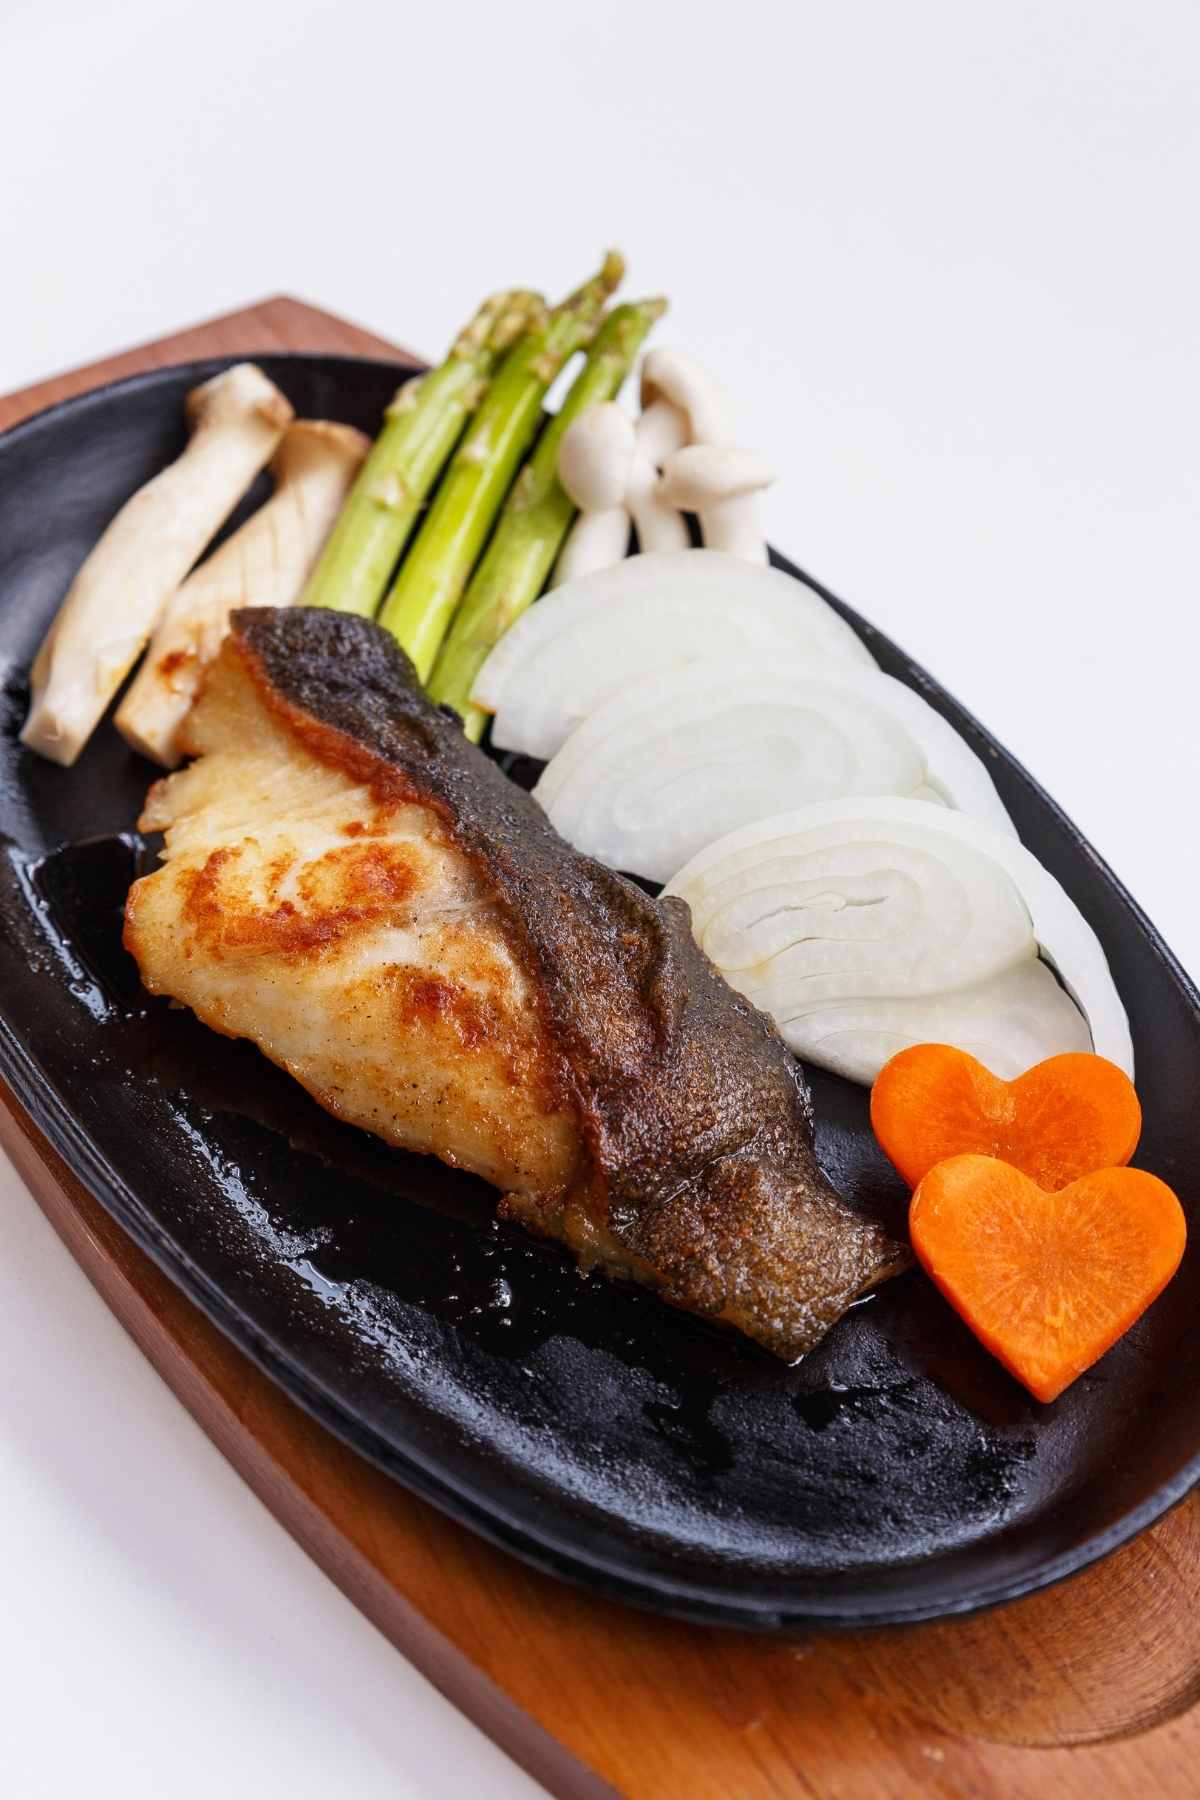 Black cod, also known as sablefish, is prized for its soft texture and buttery flavor. This recipe for Oven Baked Black Cod is easy to prepare and features the delicious flavors of soy sauce, cooking wine, and sugar for a hint of sweetness.